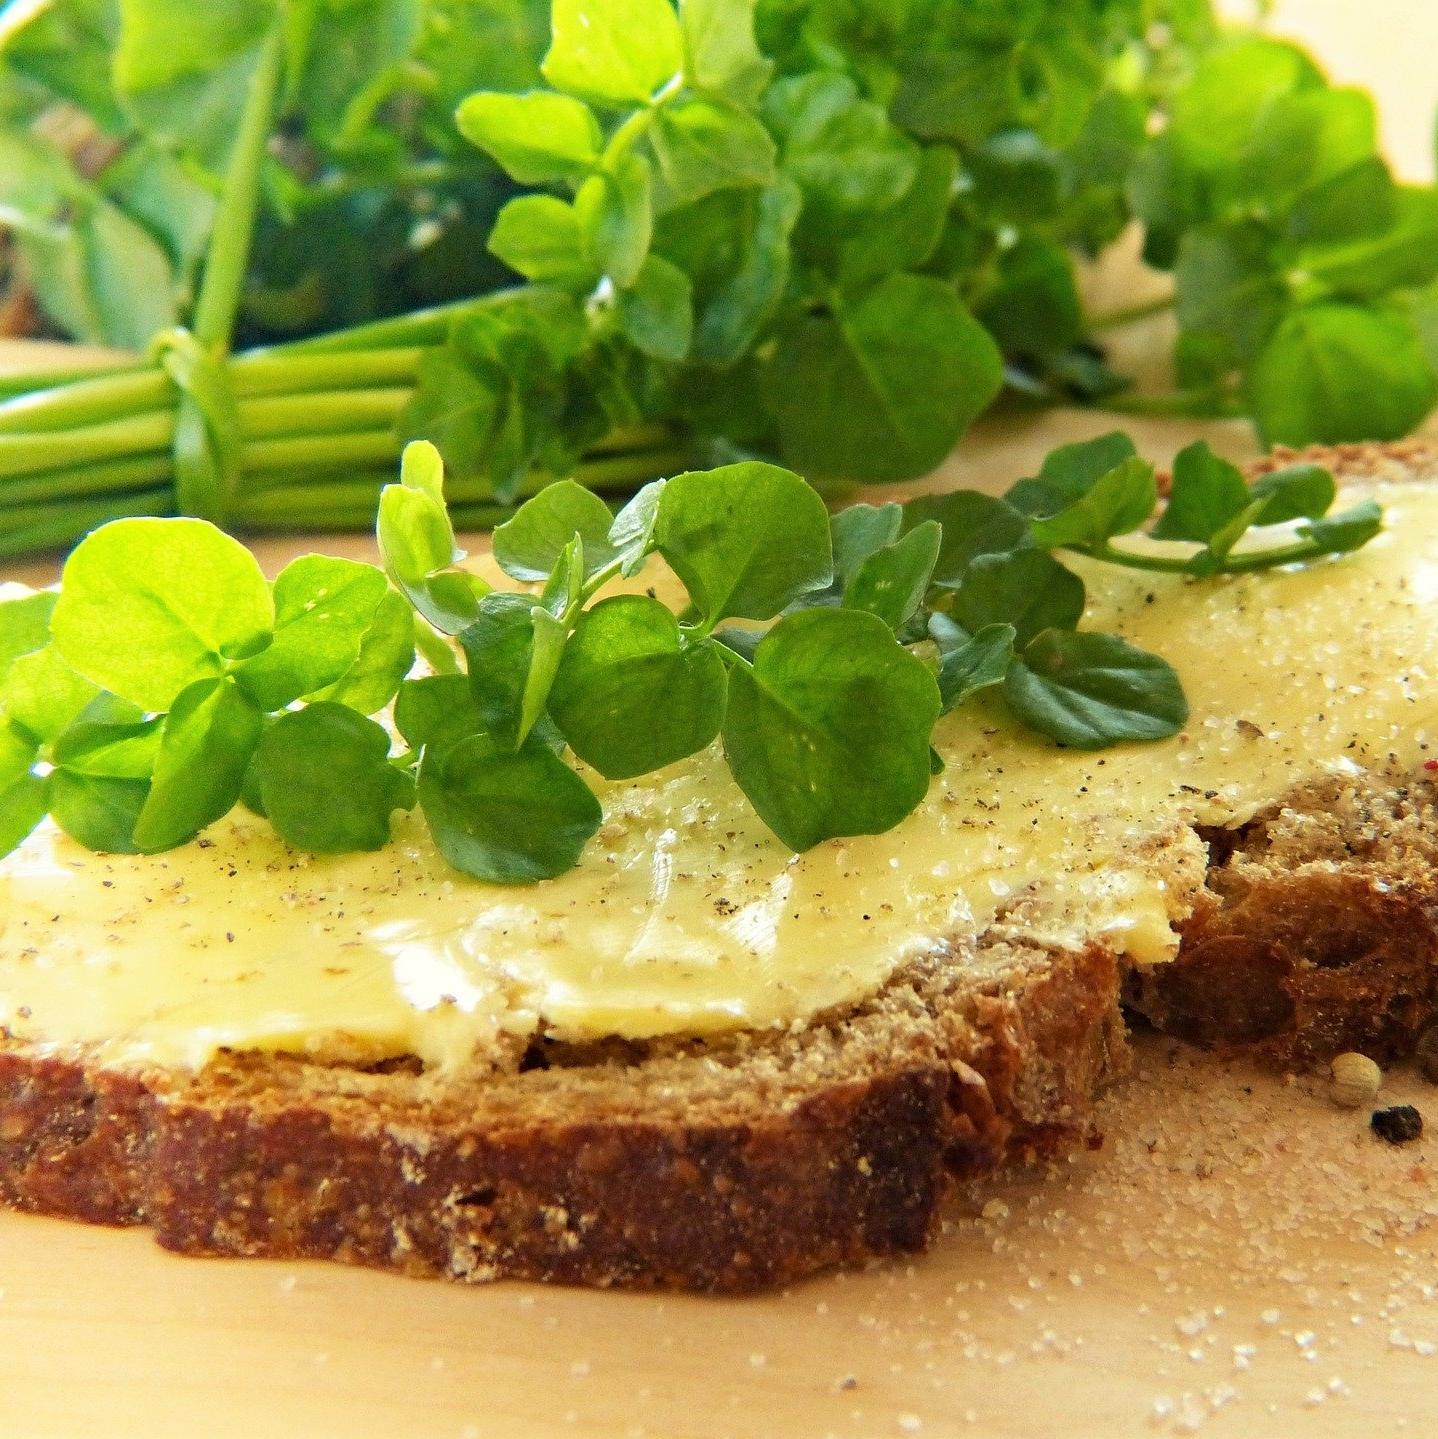 watercress on buttered bread